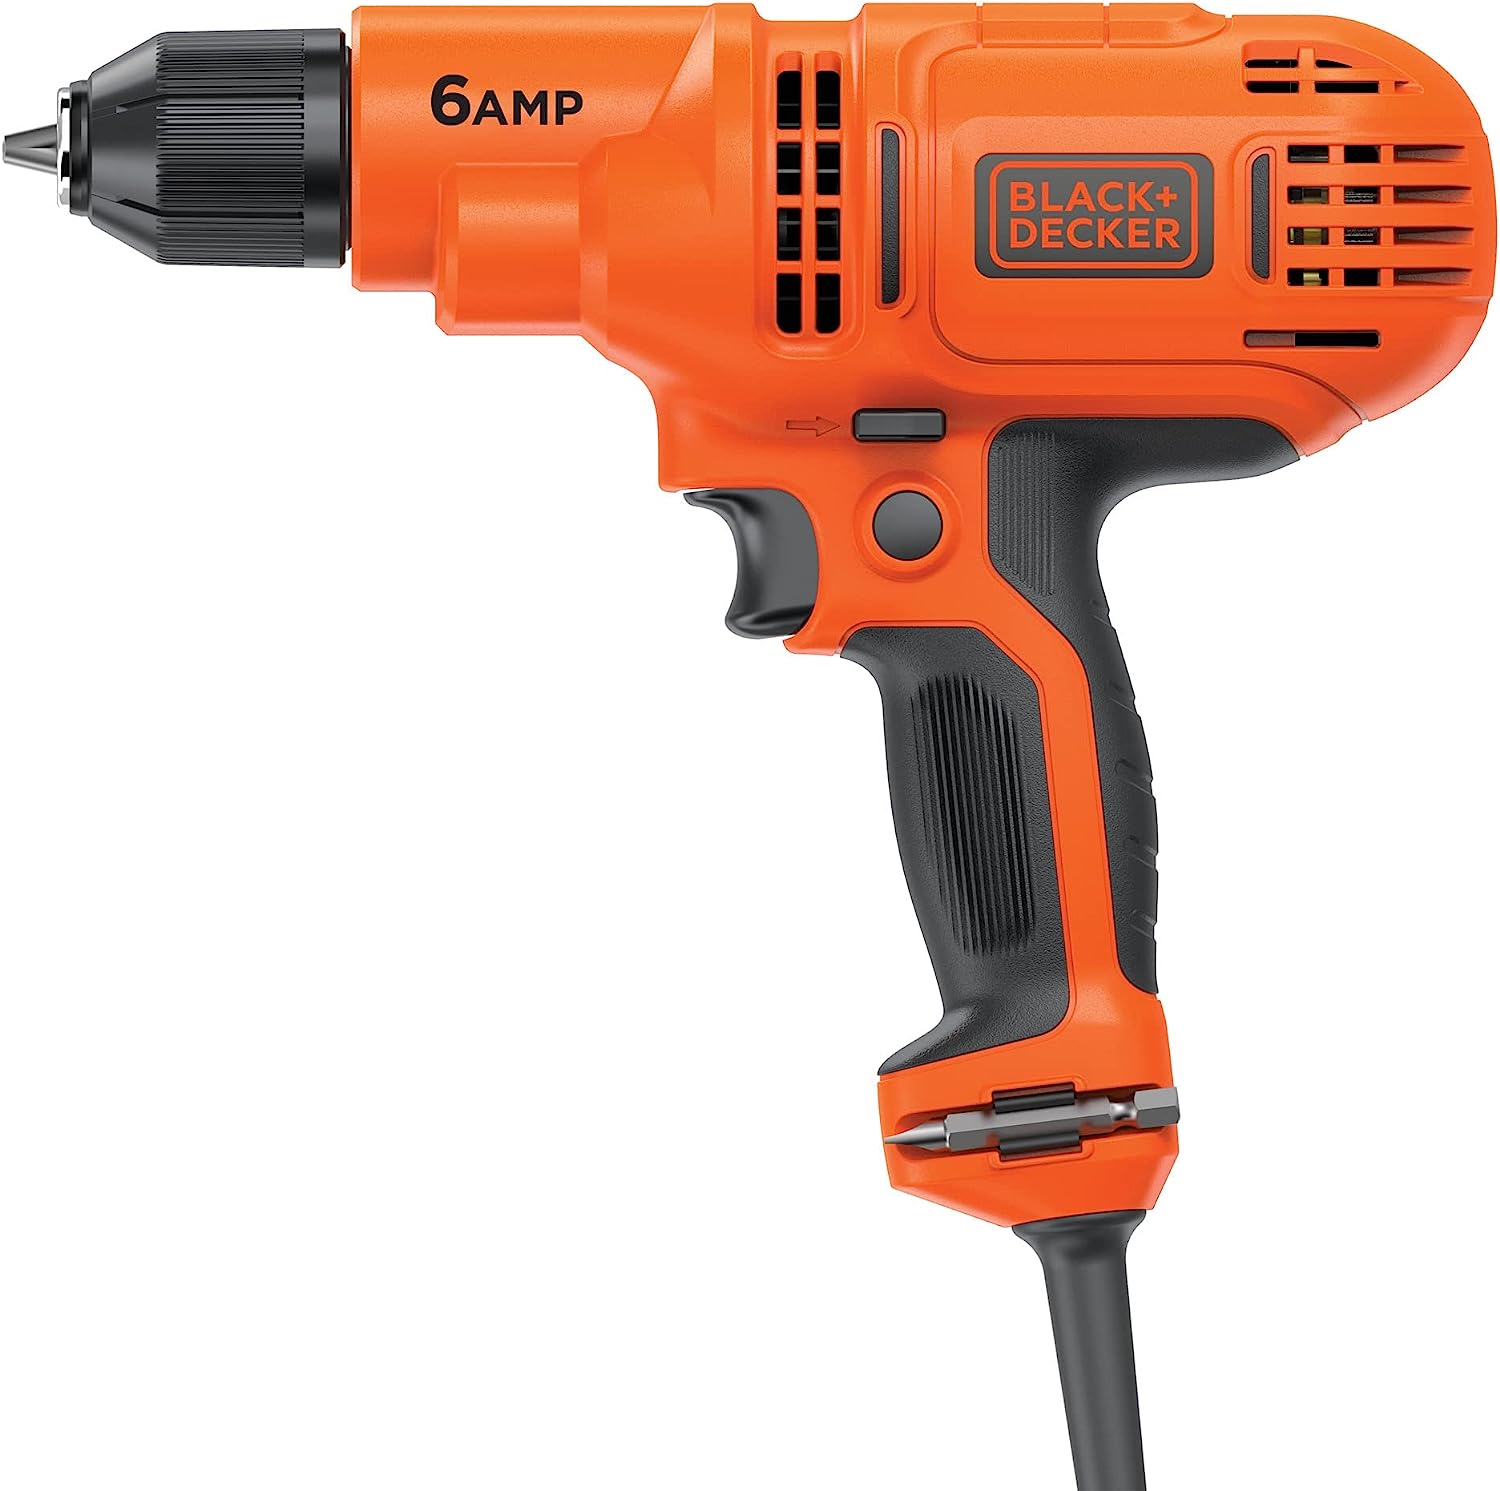 BLACK+DECKER 6.0 Amp 3/8 in. Electric Drill/Driver Kit [...]